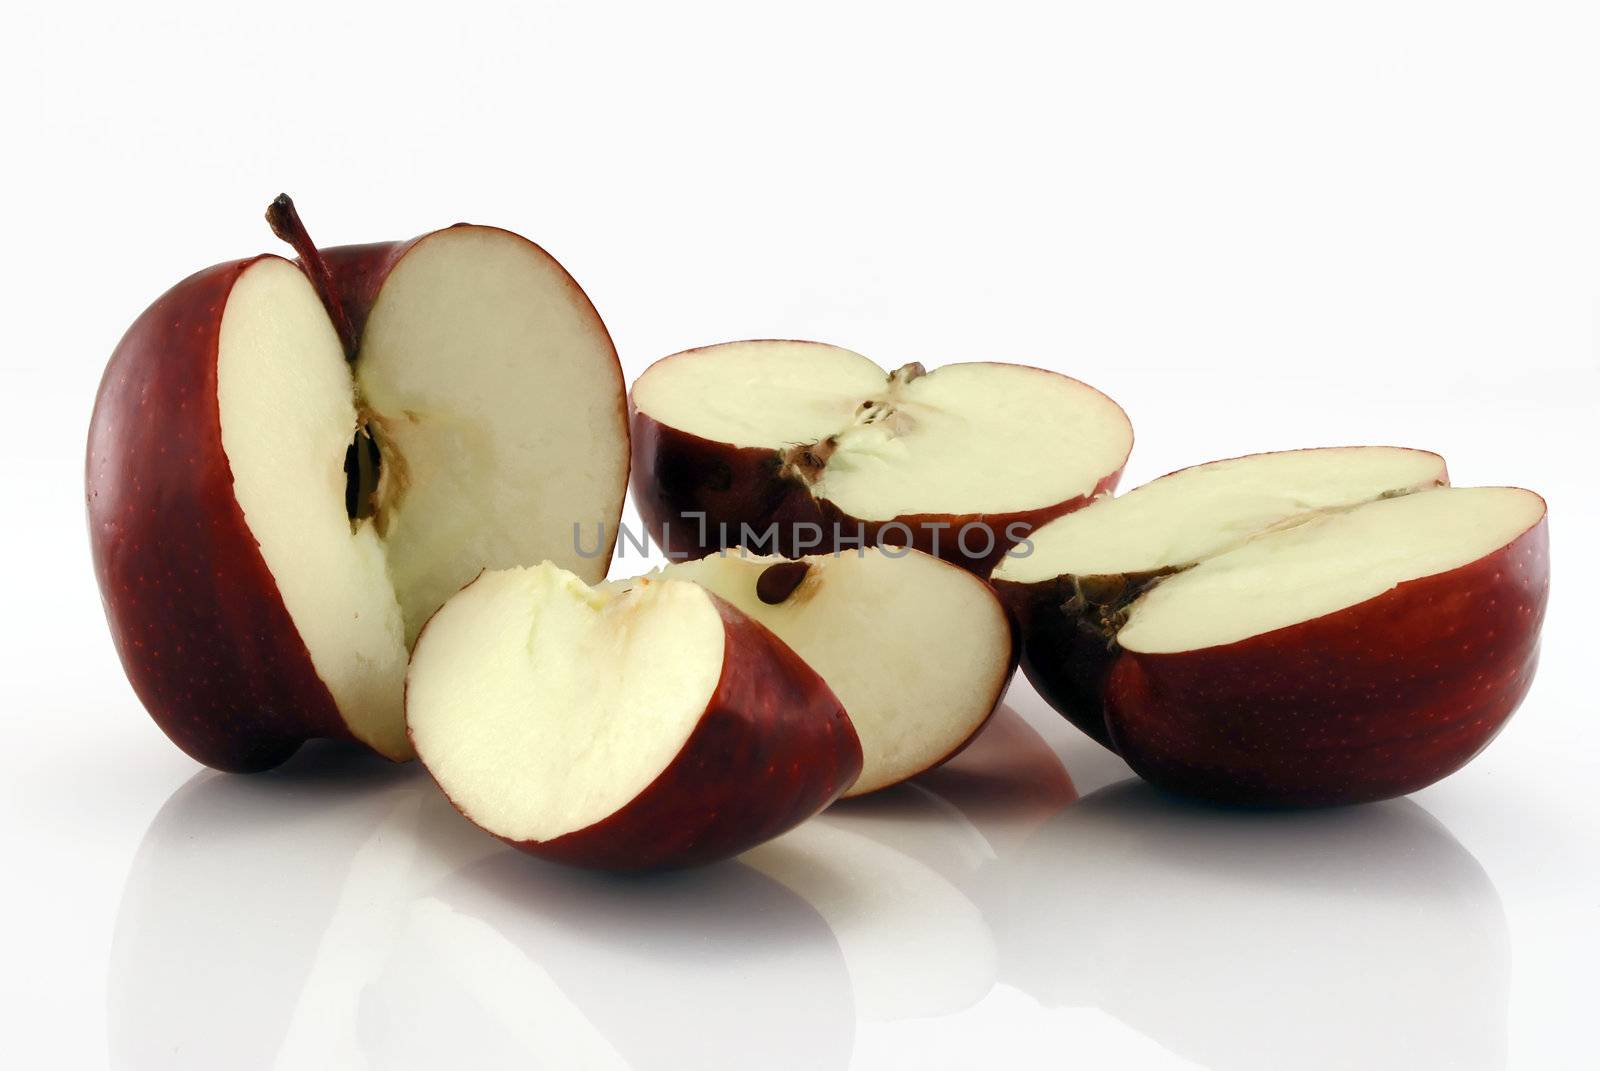 Chopped red apples on reflective background against white